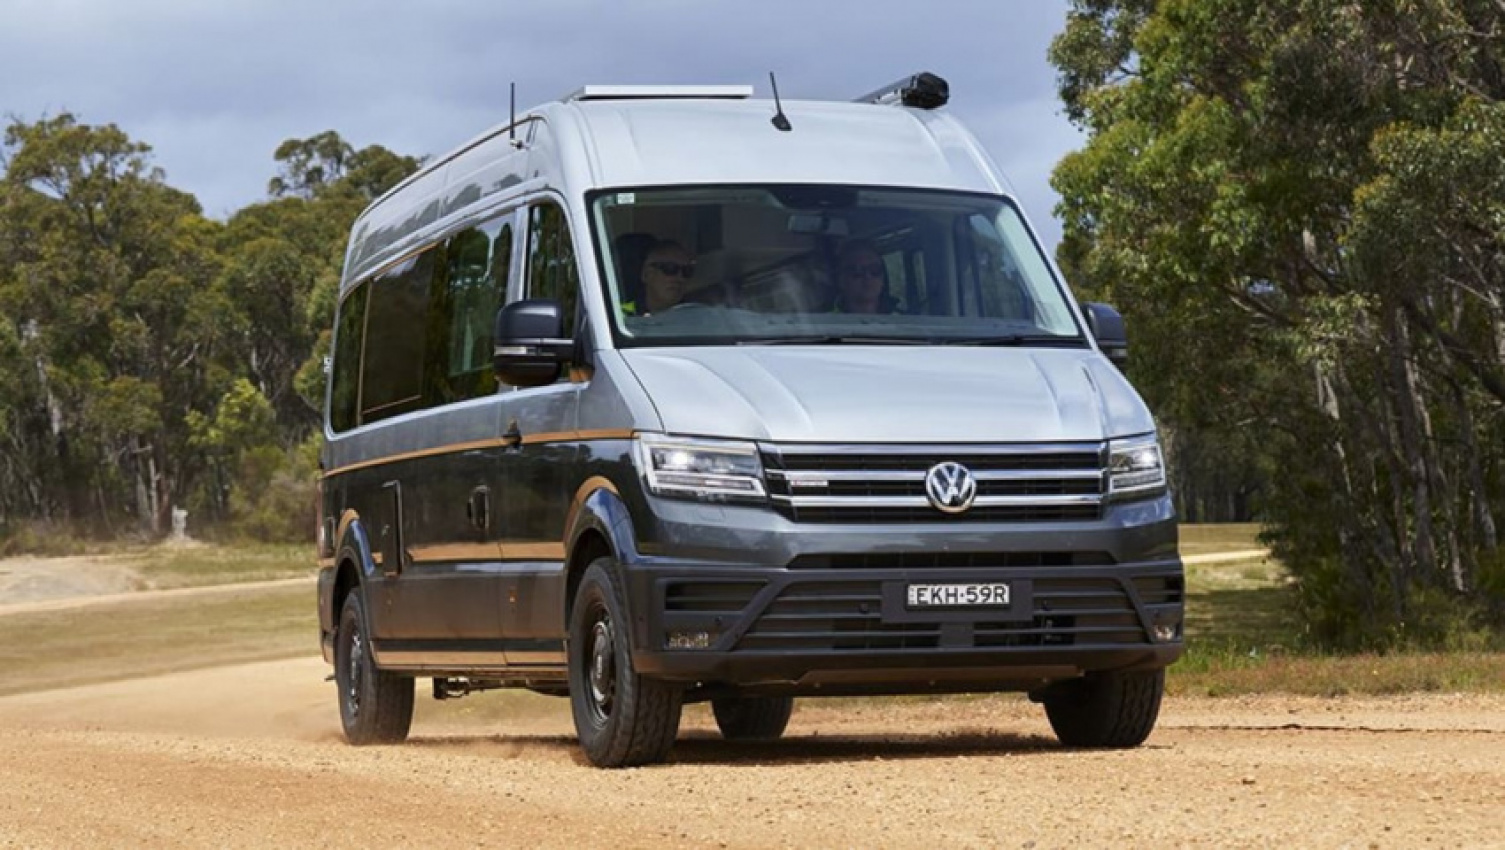 autos, cars, volkswagen, adventure, family cars, industry news, off-road, people mover, showroom news, volkswagen crafter, volkswagen crafter 2022, volkswagen news, volkswagen people mover range, android, the ultimate home on wheels? 2023 volkswagen crafter kampervan revealed as new motorhome built with jayco